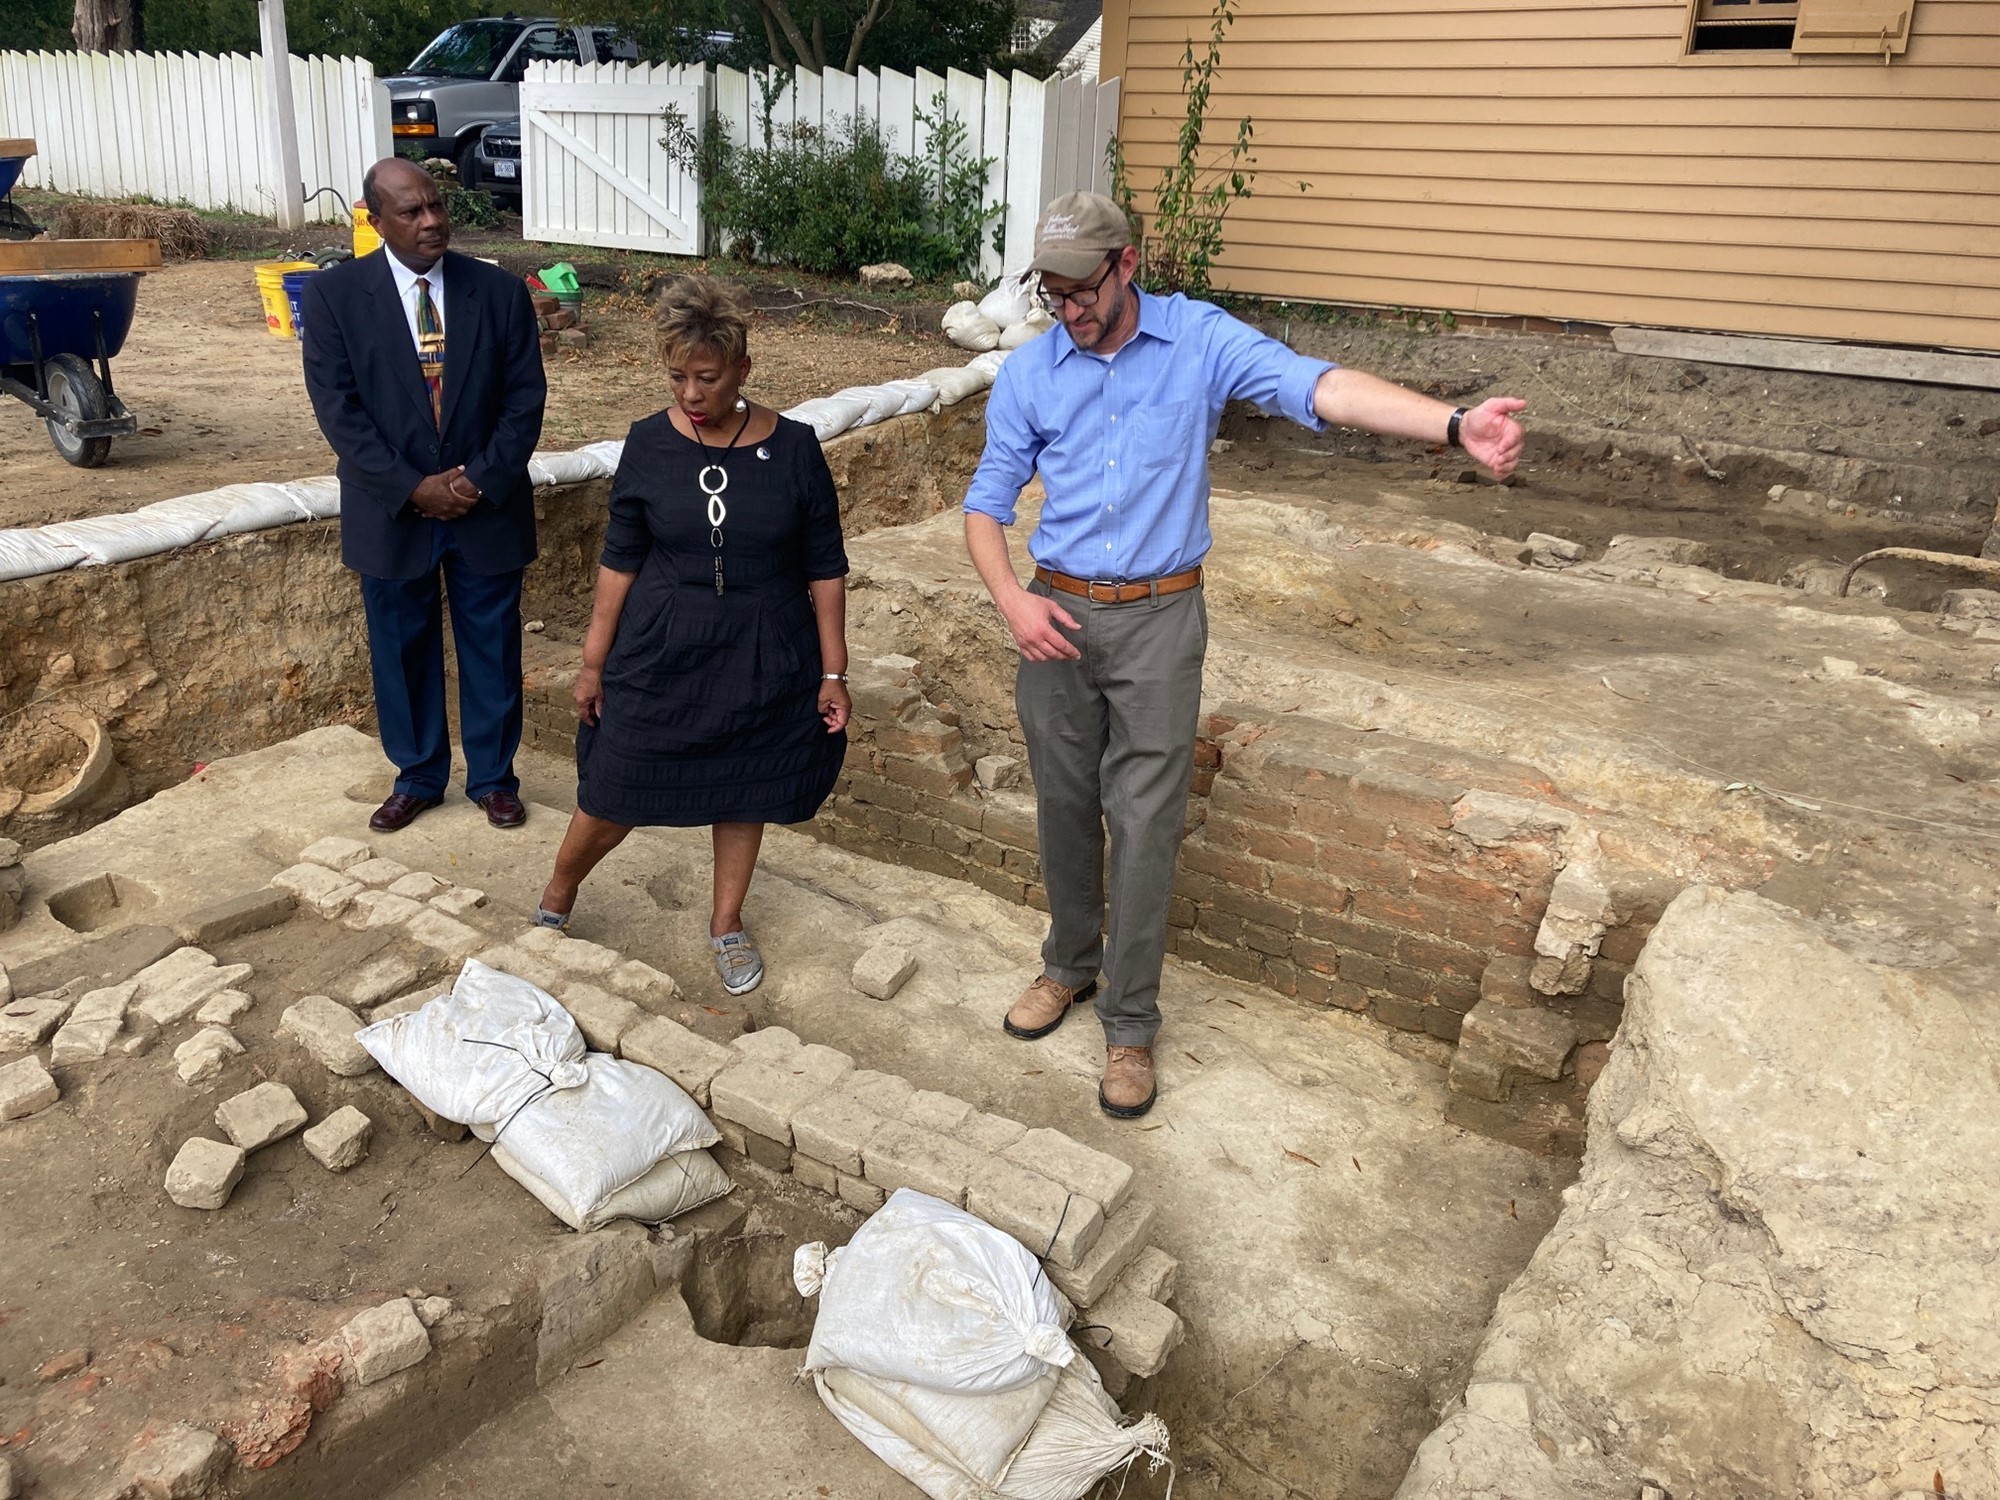 A white man and a black man and woman stand in the excavated remains of a brick building.